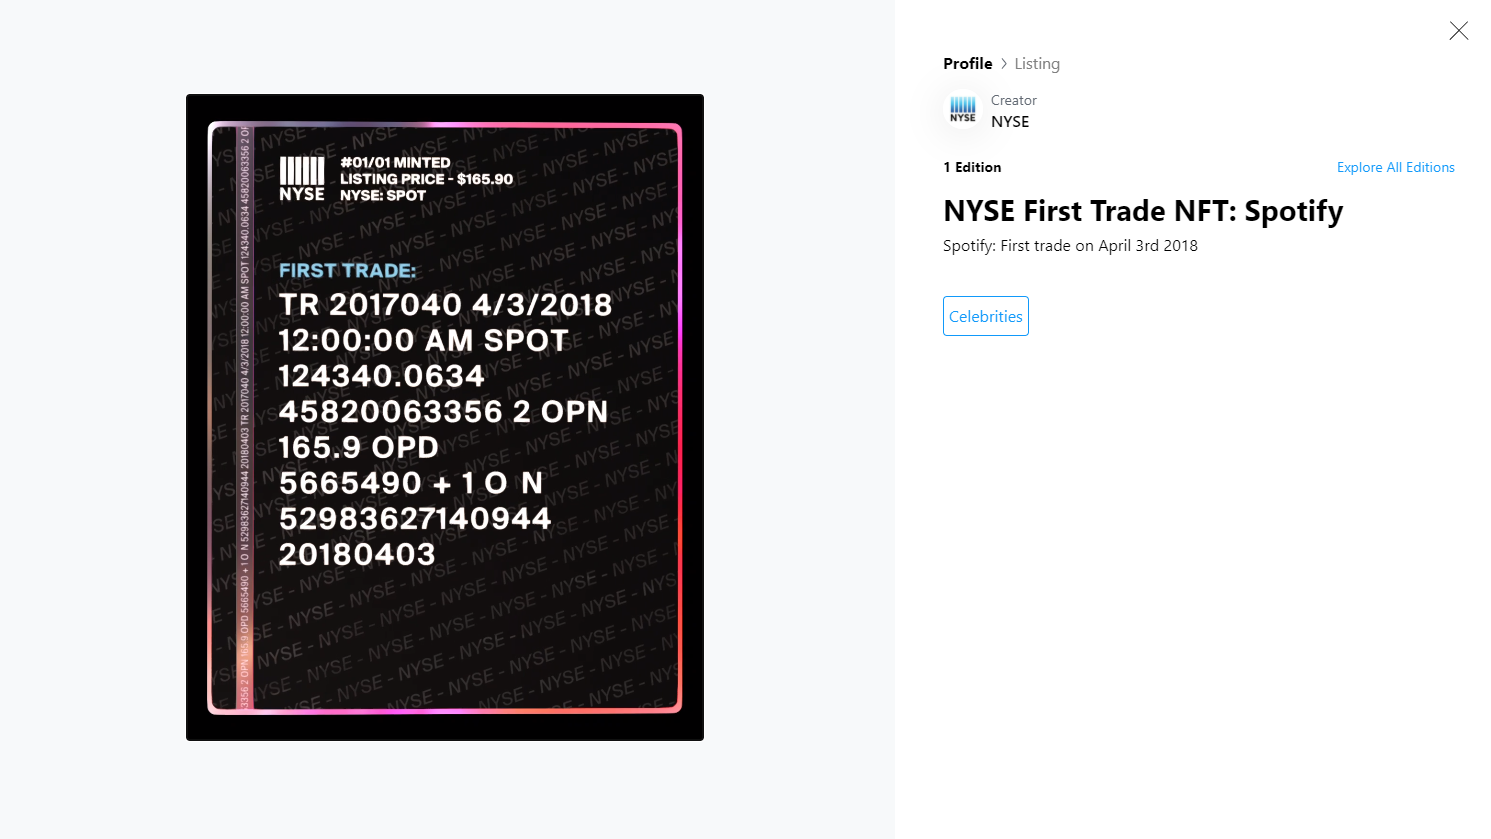 NYSE celebrates historic ‘first trades’ with NFT series